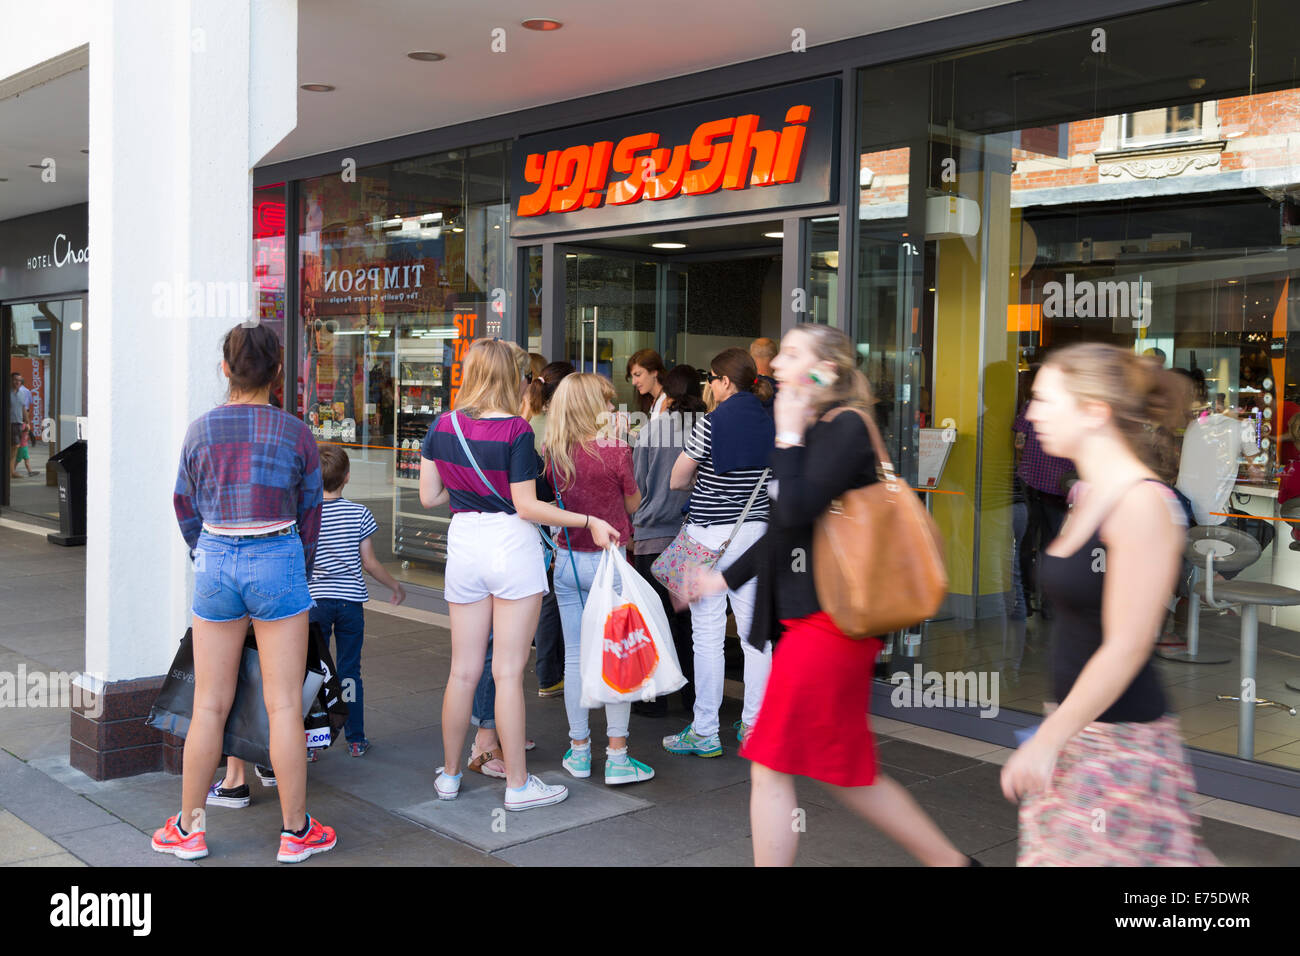 People queuing up to get into Yo! Sushi restaurant, Cambridge, England Stock Photo